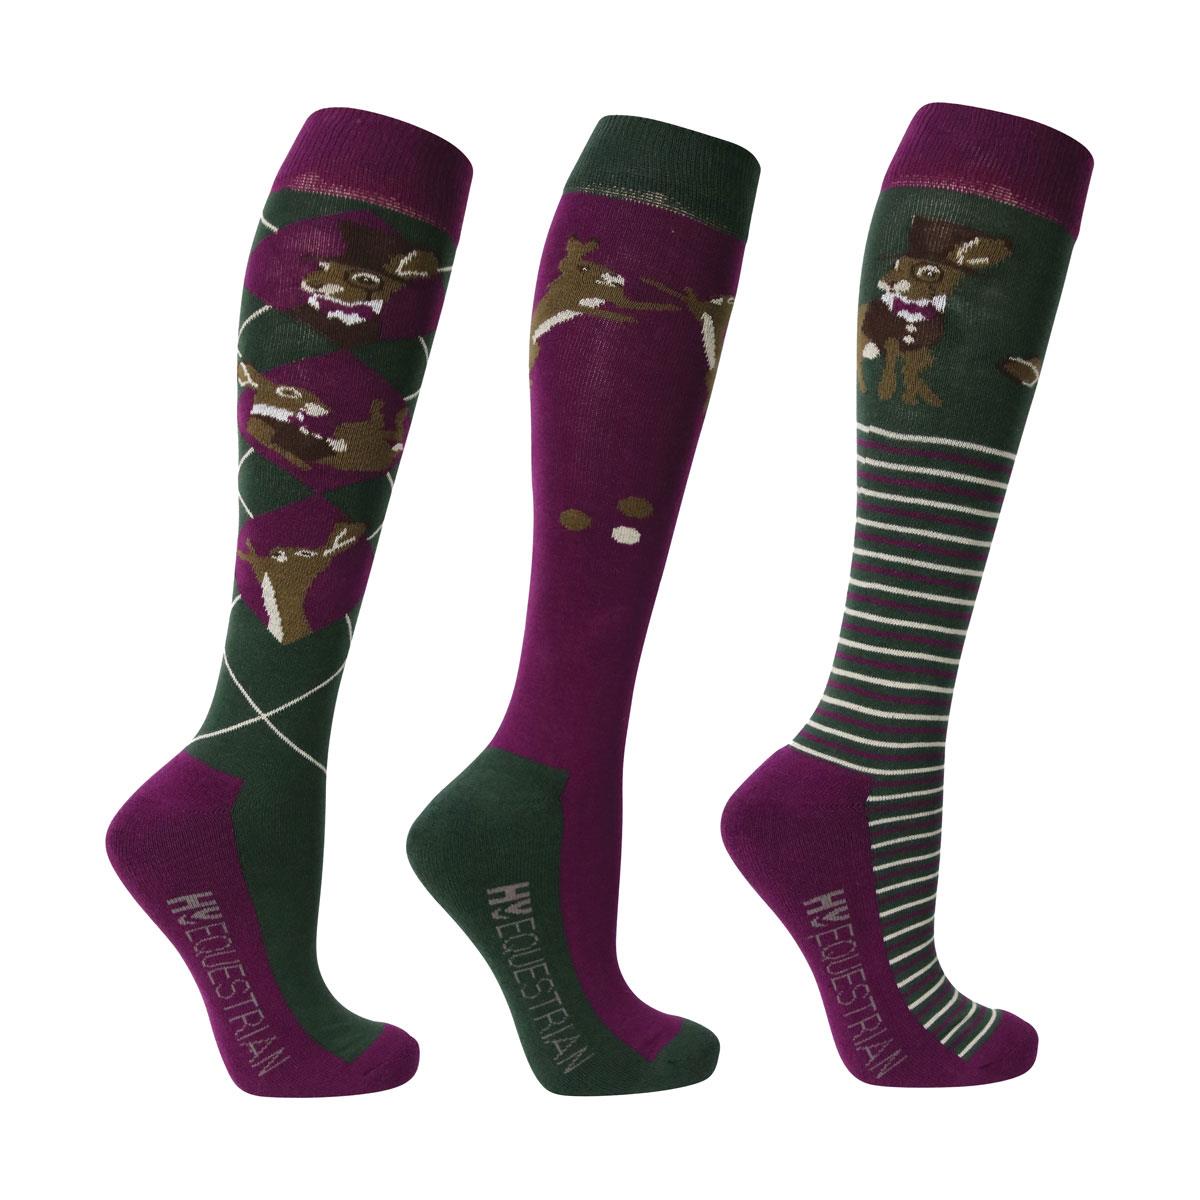 Hy Equestrian Harrison the Hare Horse Riding Socks (Pack of 3) - Just Horse Riders